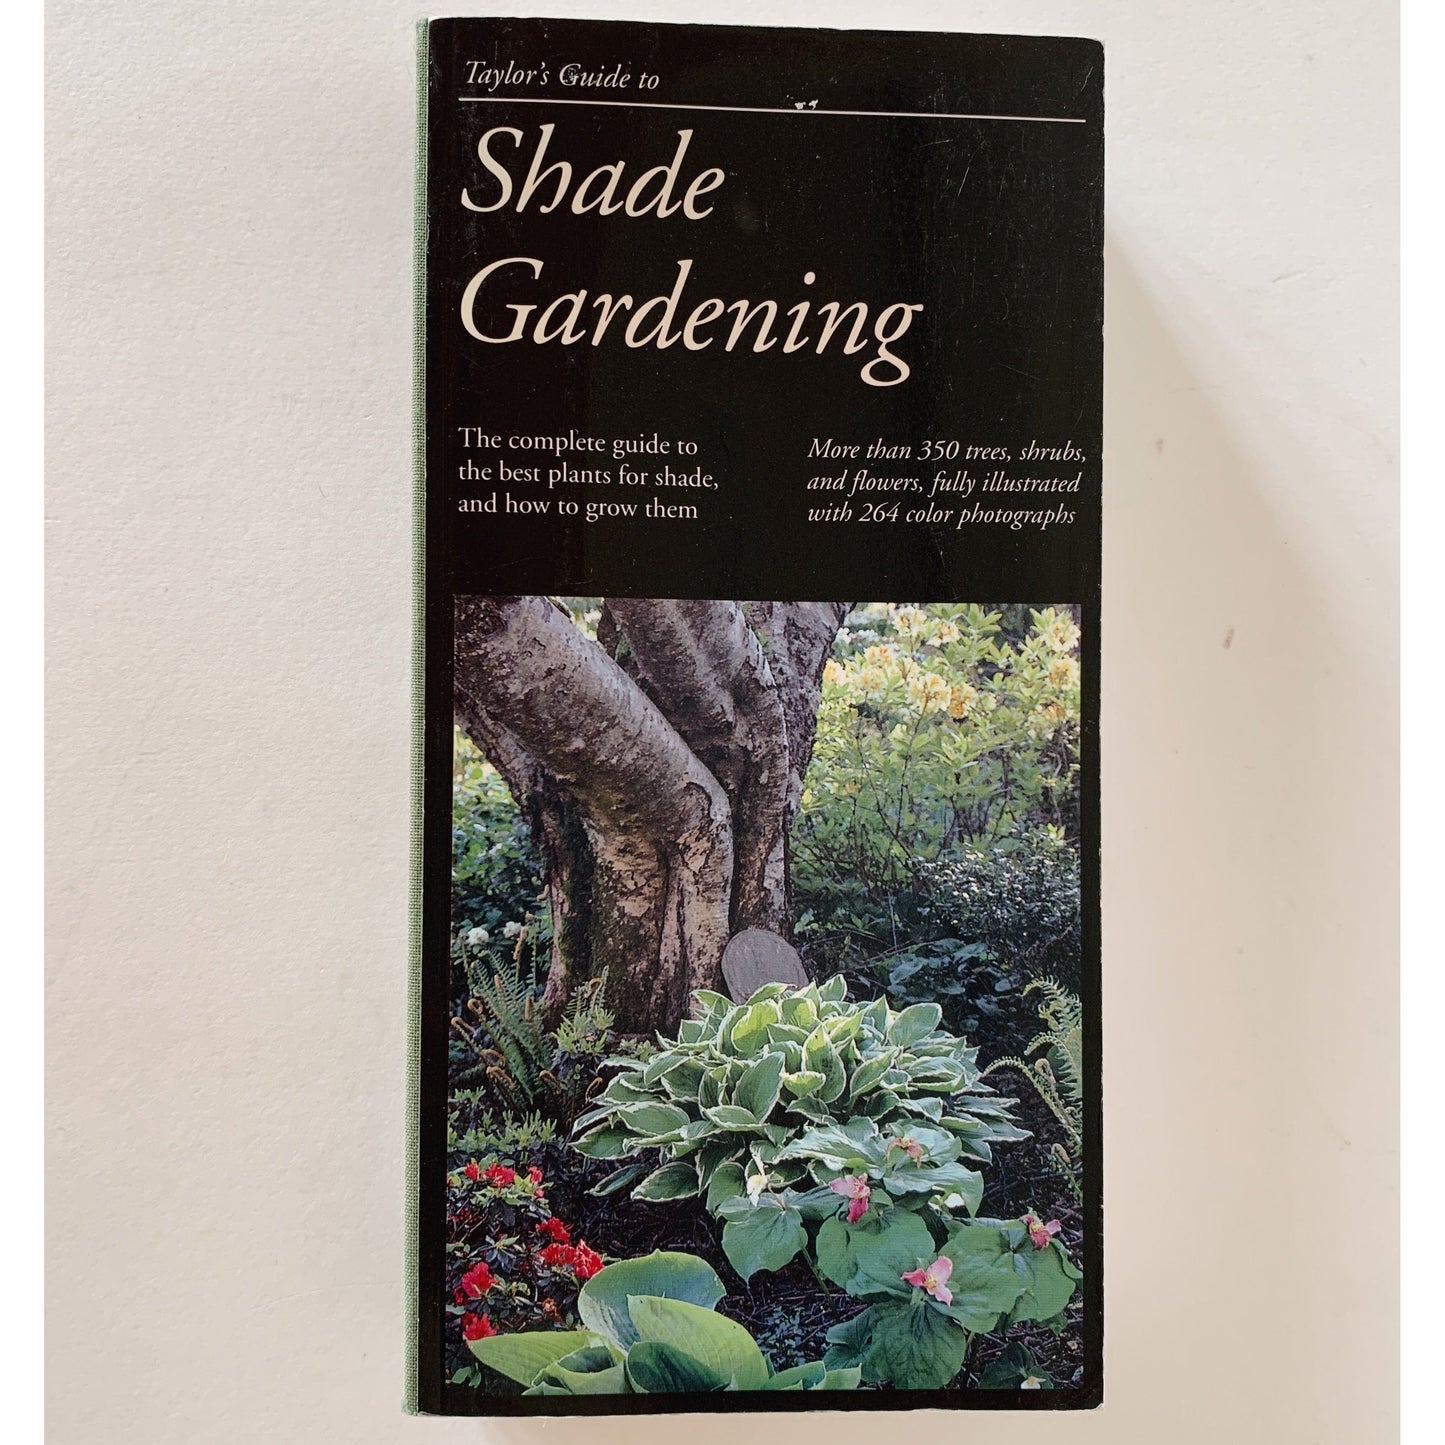 Taylor's Guide to Shade Gardening, 1994